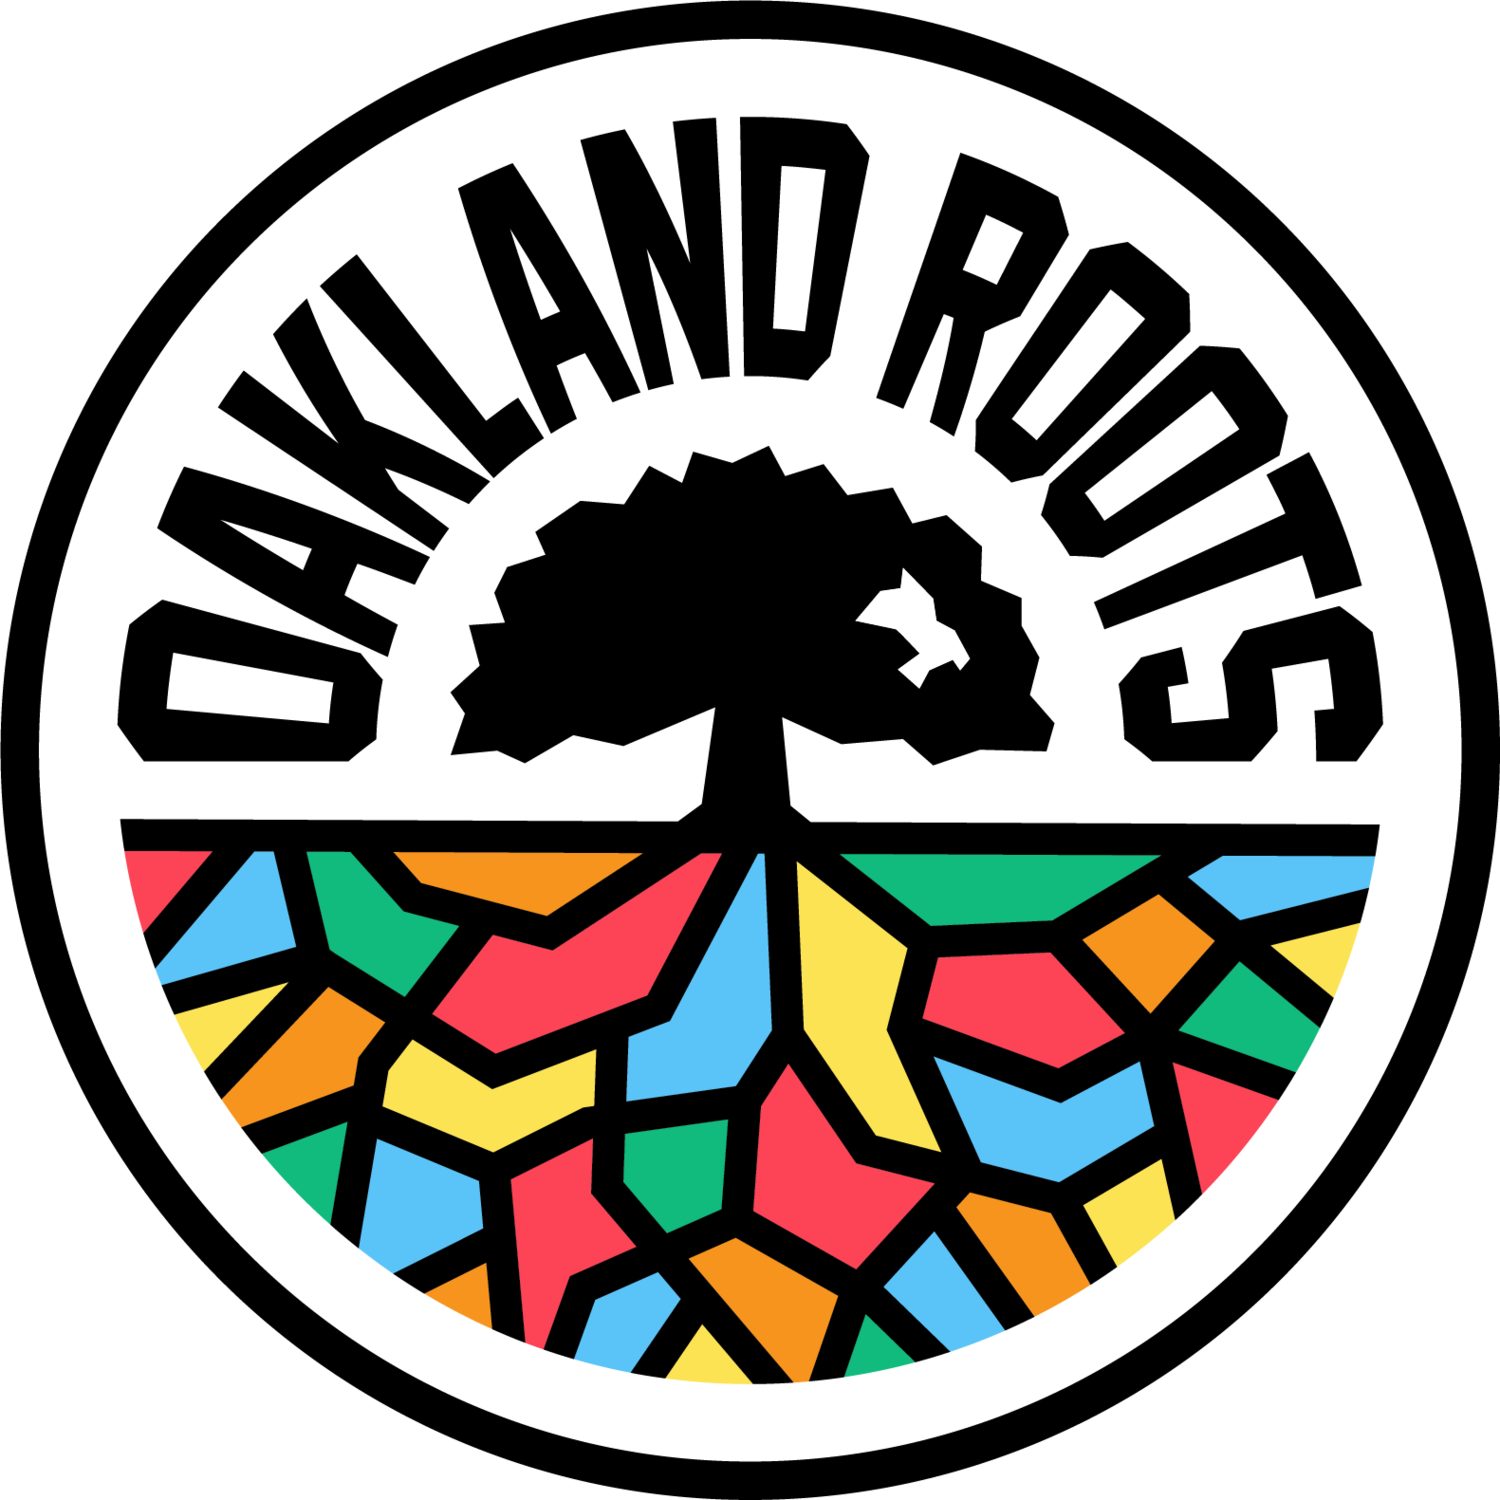 Oakland Roots Sports Club Partner with One Toyota of Oakland